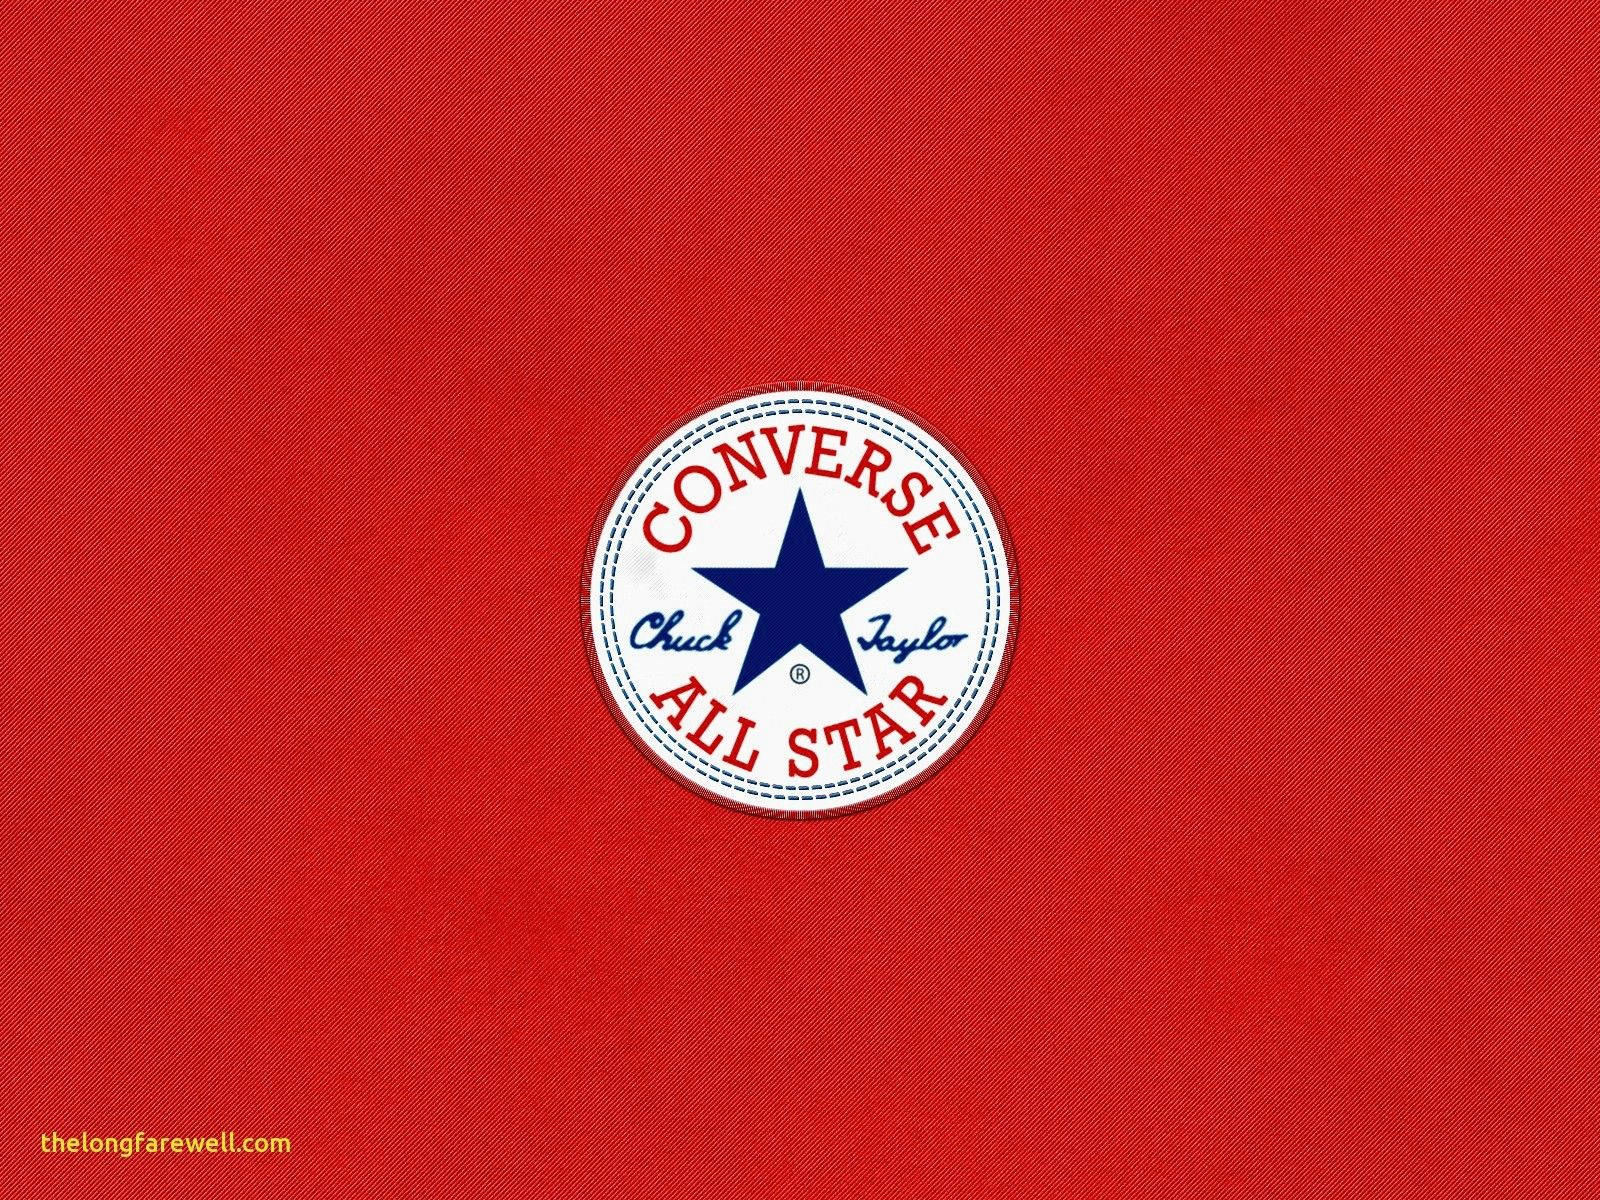 Converse Logo In Red Aesthetic Wallpaper